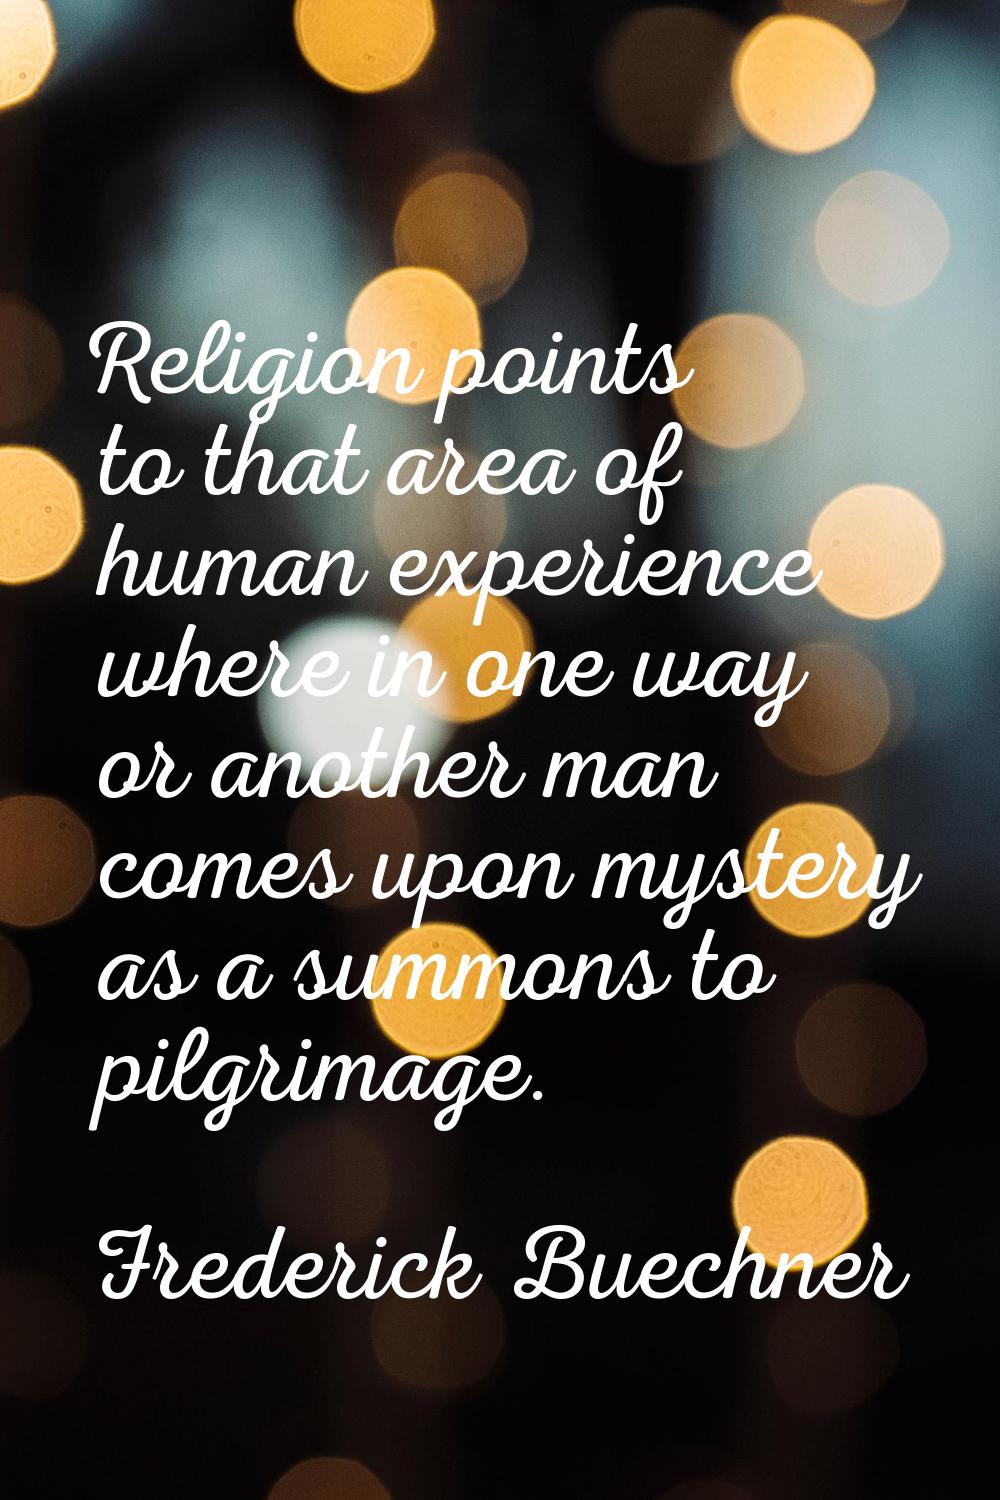 Religion points to that area of human experience where in one way or another man comes upon mystery